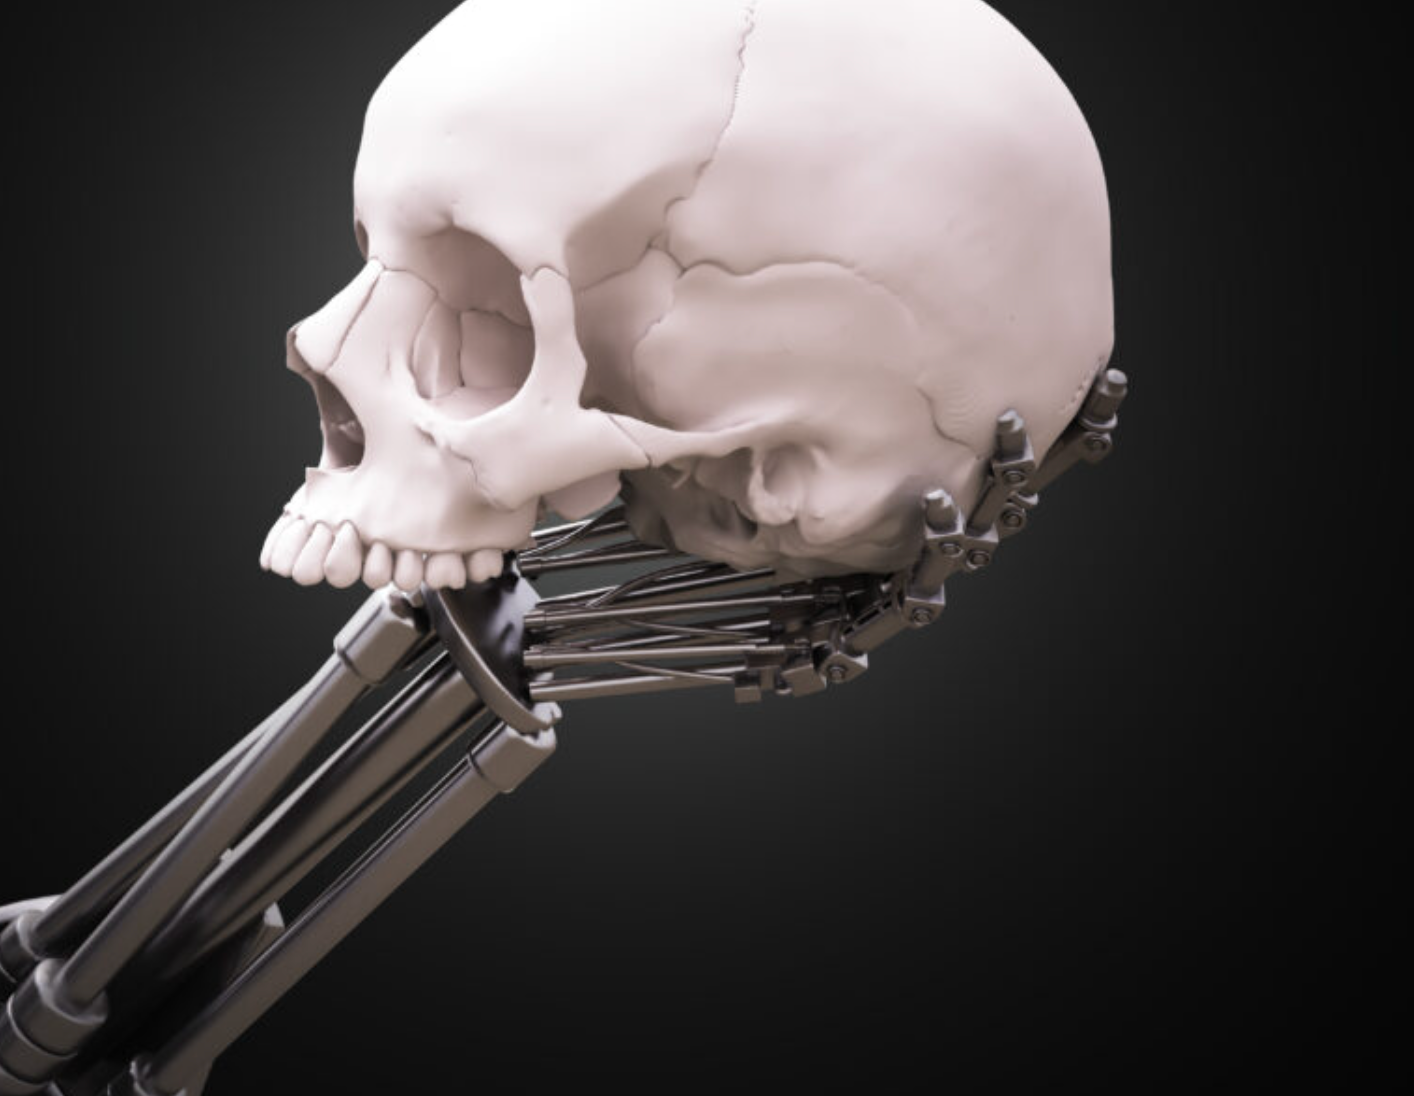 On a black background, image of an articulated metallic arm and hand composed of multiple rods holds a white human skull. The skull faces to the left, the same direction that the arm is emerging from.